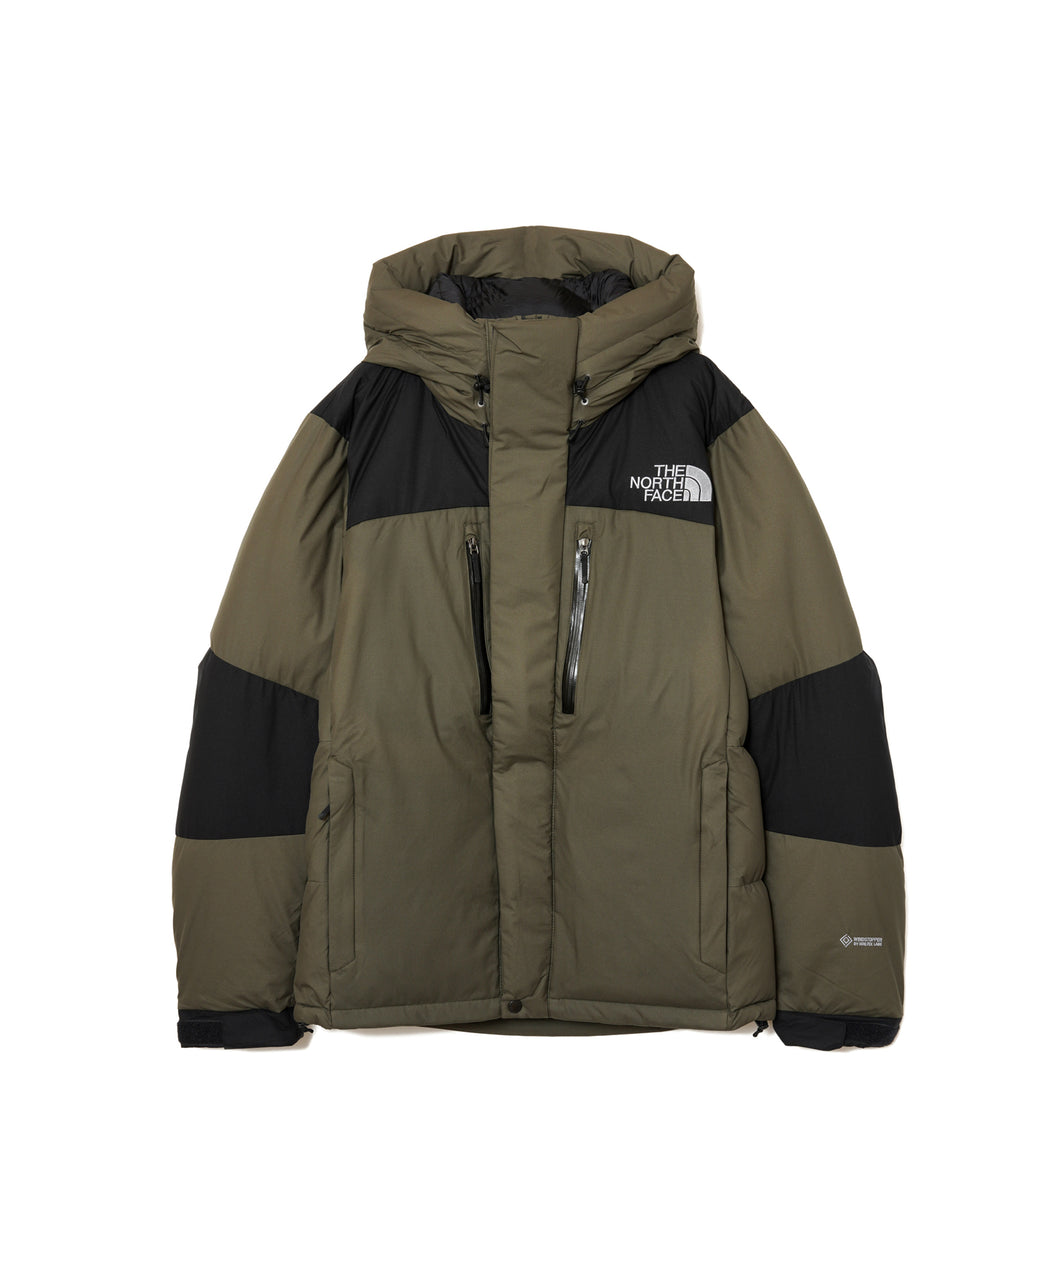 MEN , WOMEN】THE NORTH FACE THE NORTH FACE バルトロライト